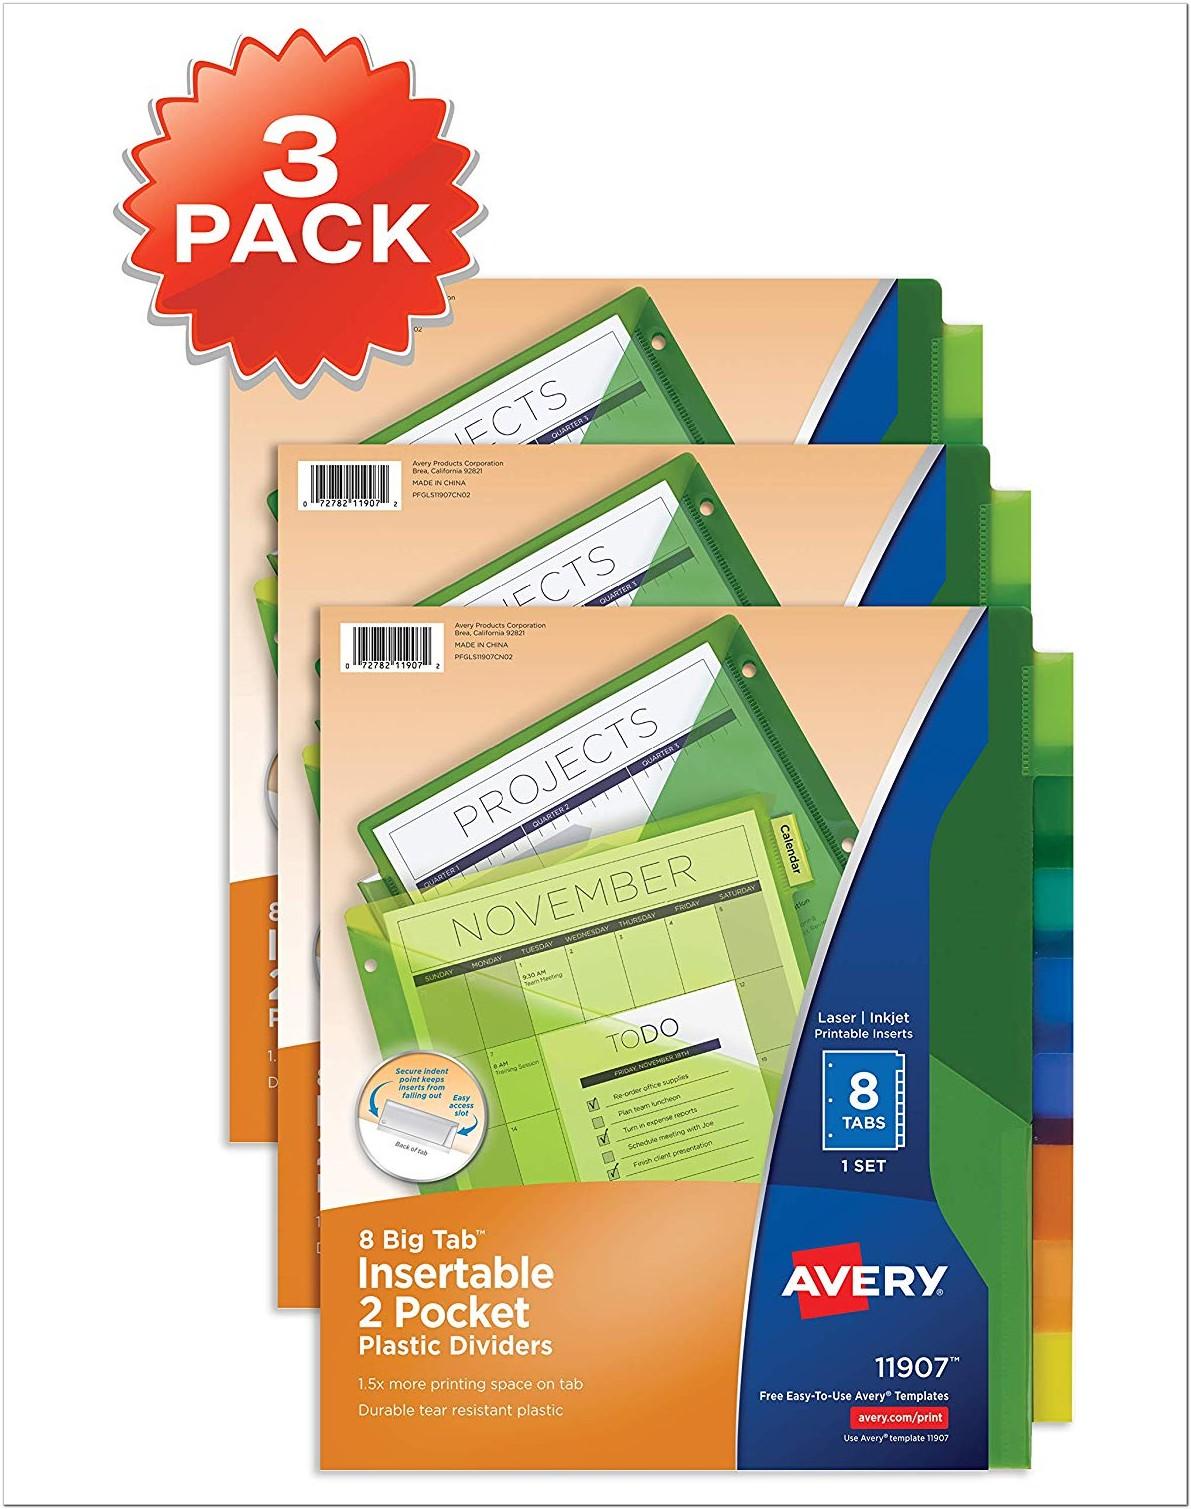 Avery Insertable Dividers 11907 Template